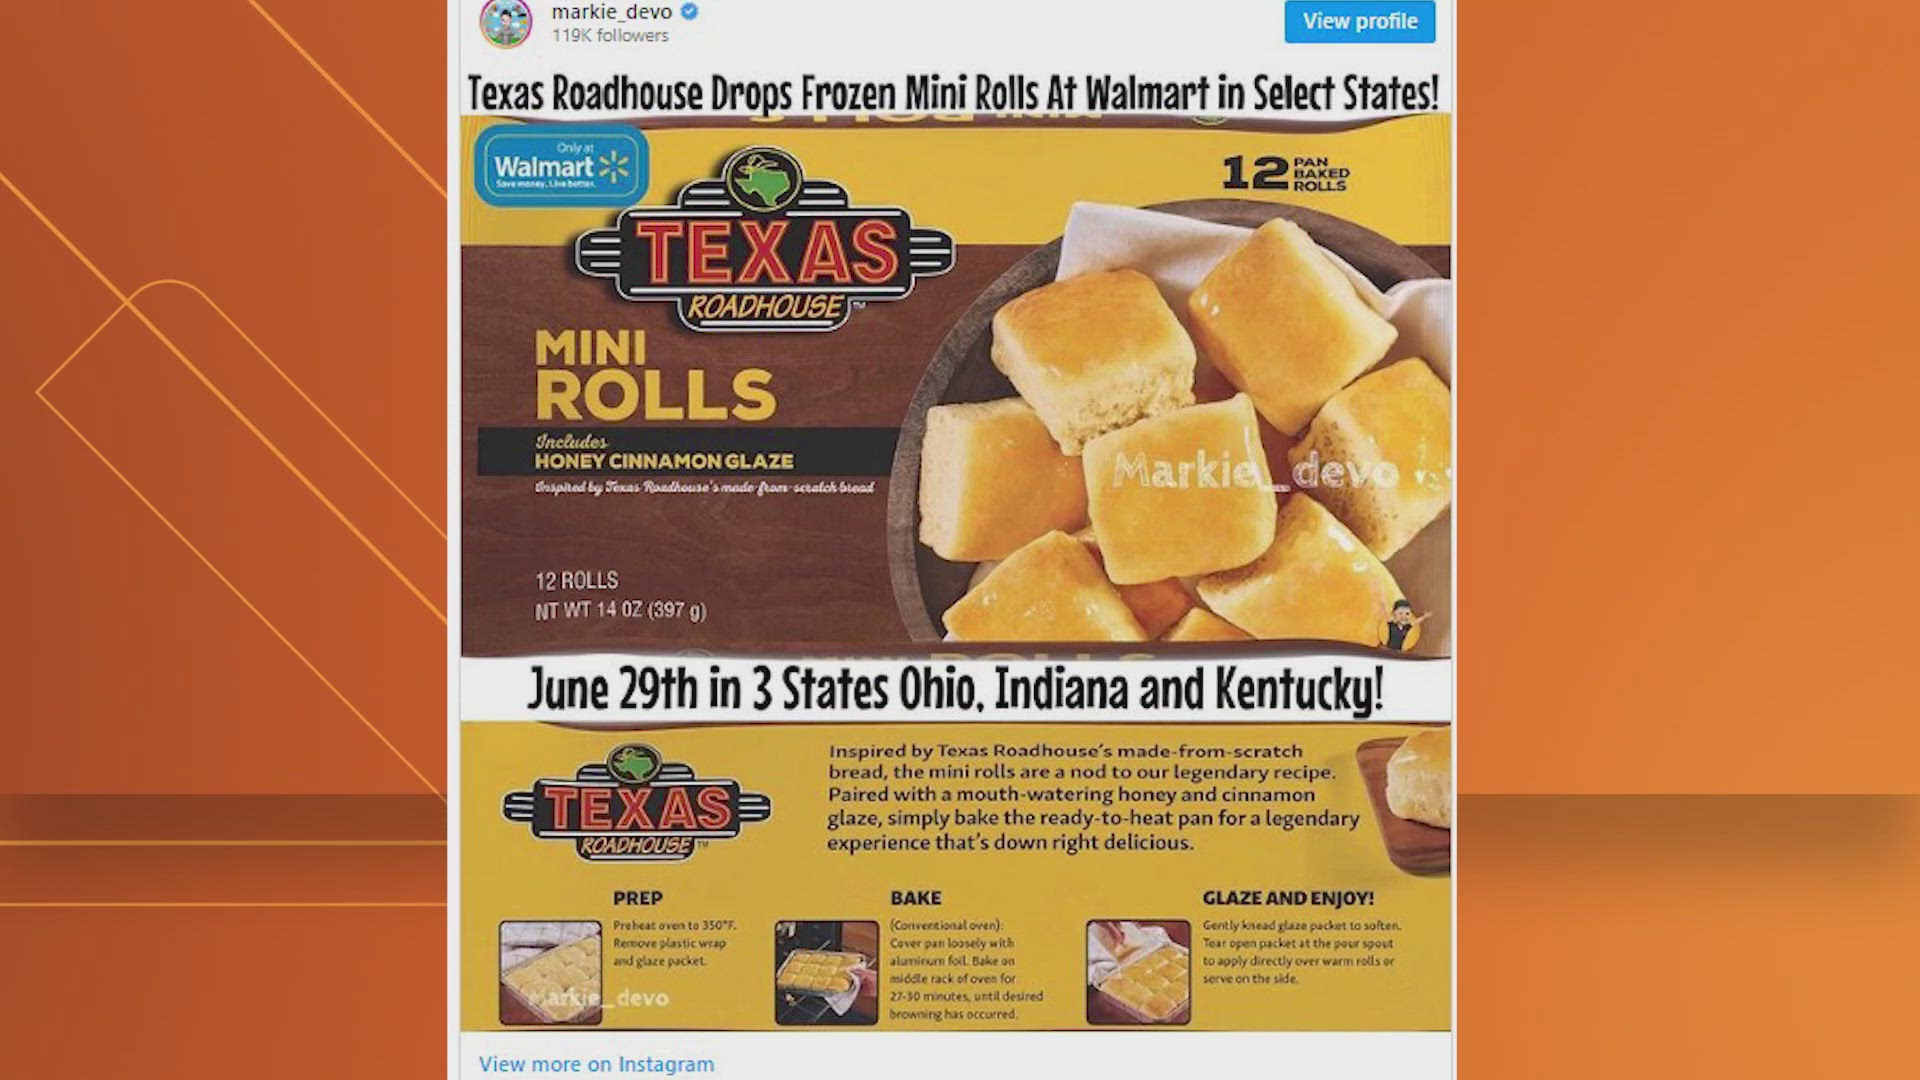 The frozen rolls will not initially be available in Texas, though.